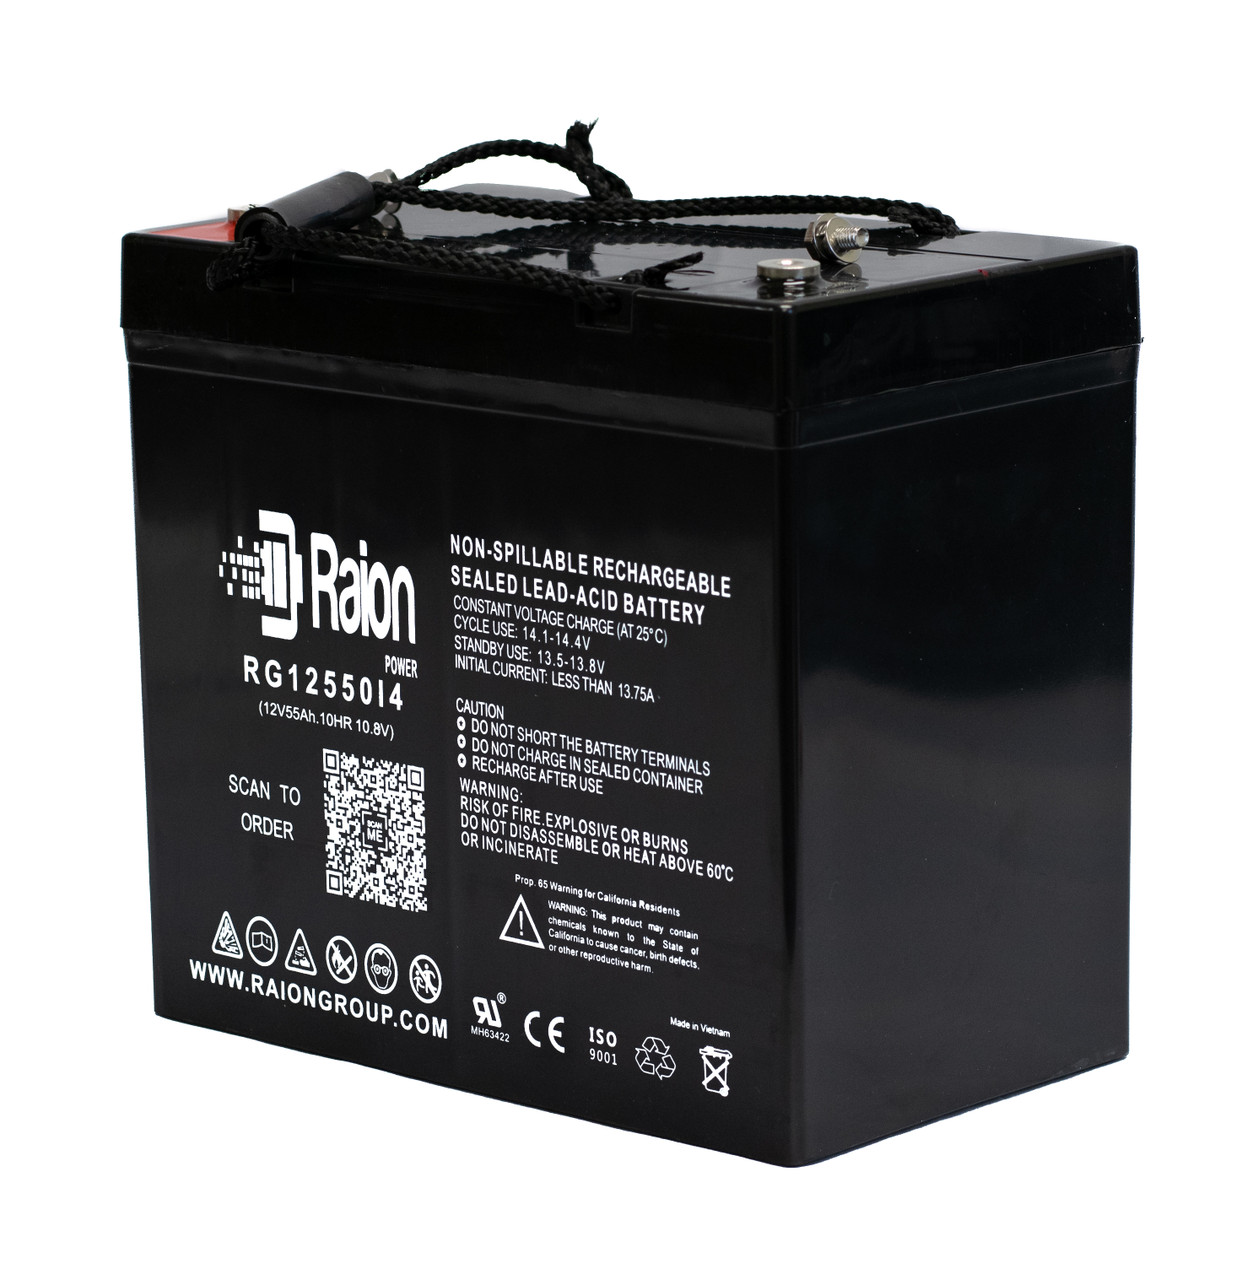 Raion Power Replacement 12V 55Ah Battery for CGB CB12550 - 1 Pack